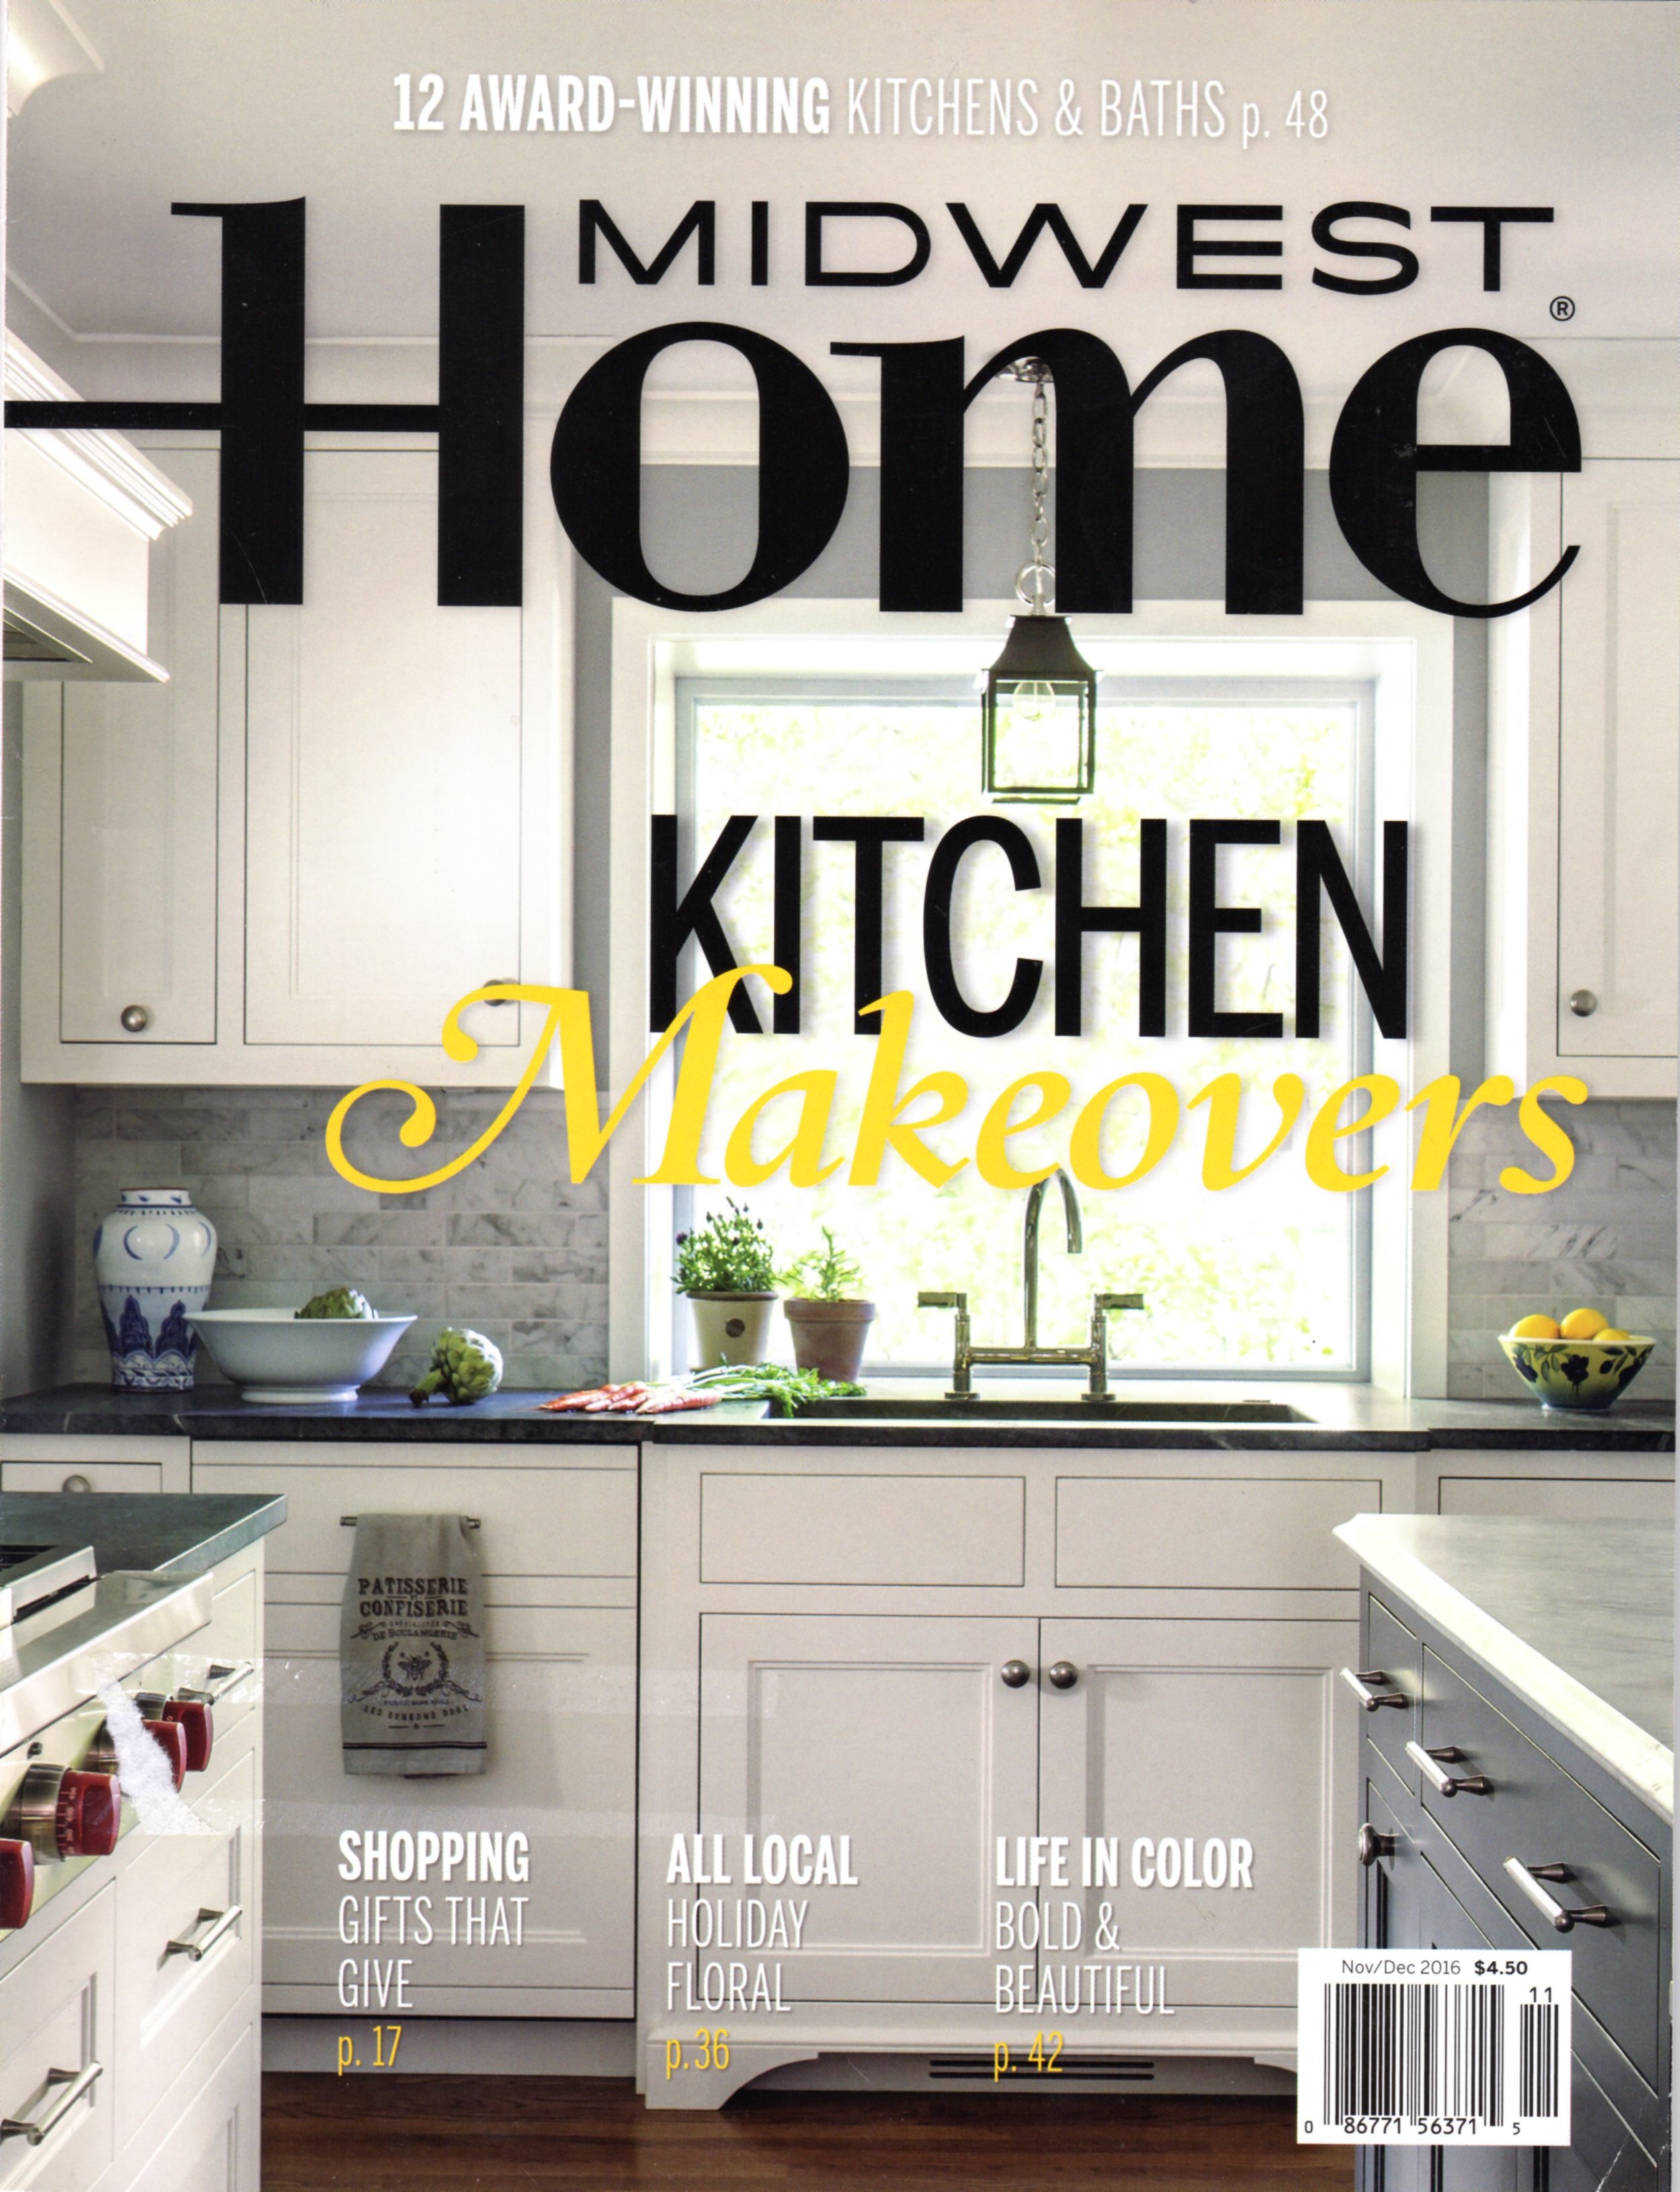 Midwest Home Kitchen Makeovers.jpg